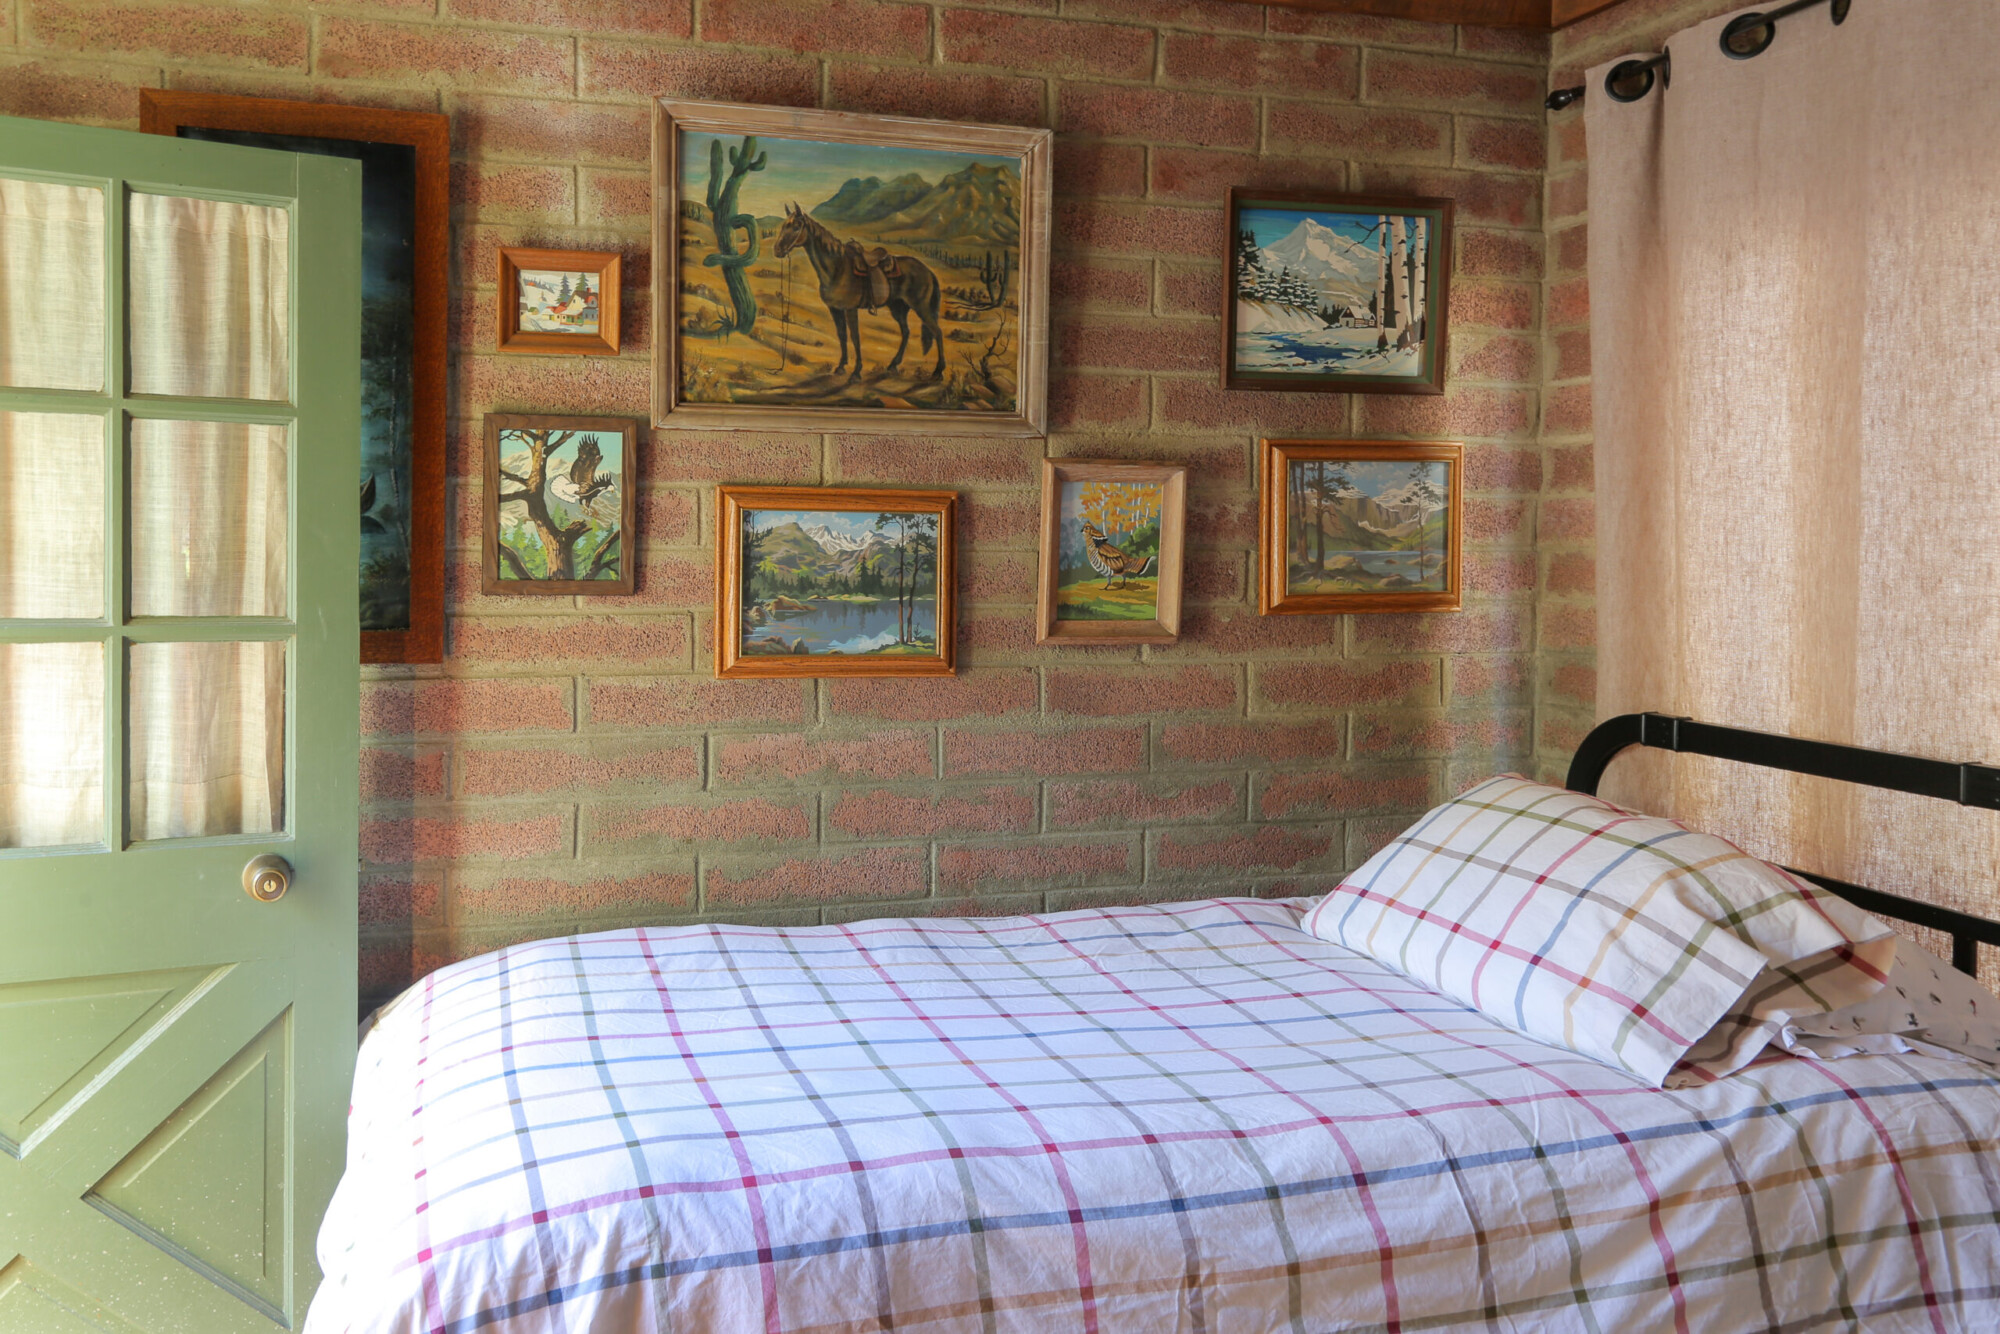 A twin bed set against a brick wall with a collection of paintings in a twin bedroom at Kern River House's River Willow Cabin in Kernville, California.